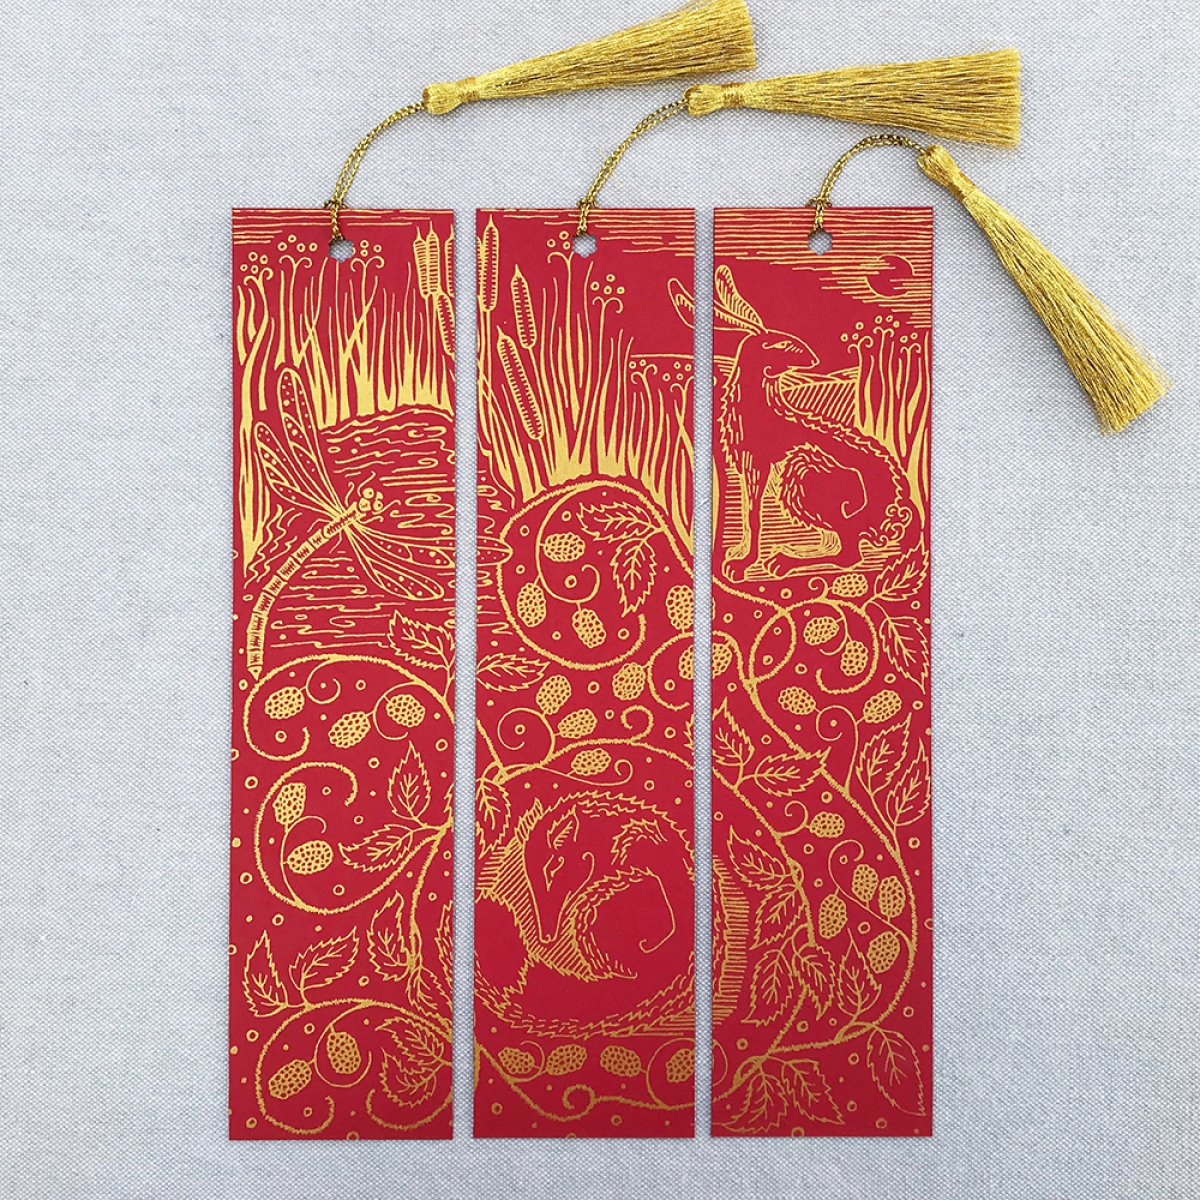 Nature Intertwined Hand Printed Triptych Bookmarks Guardsman Red Gold